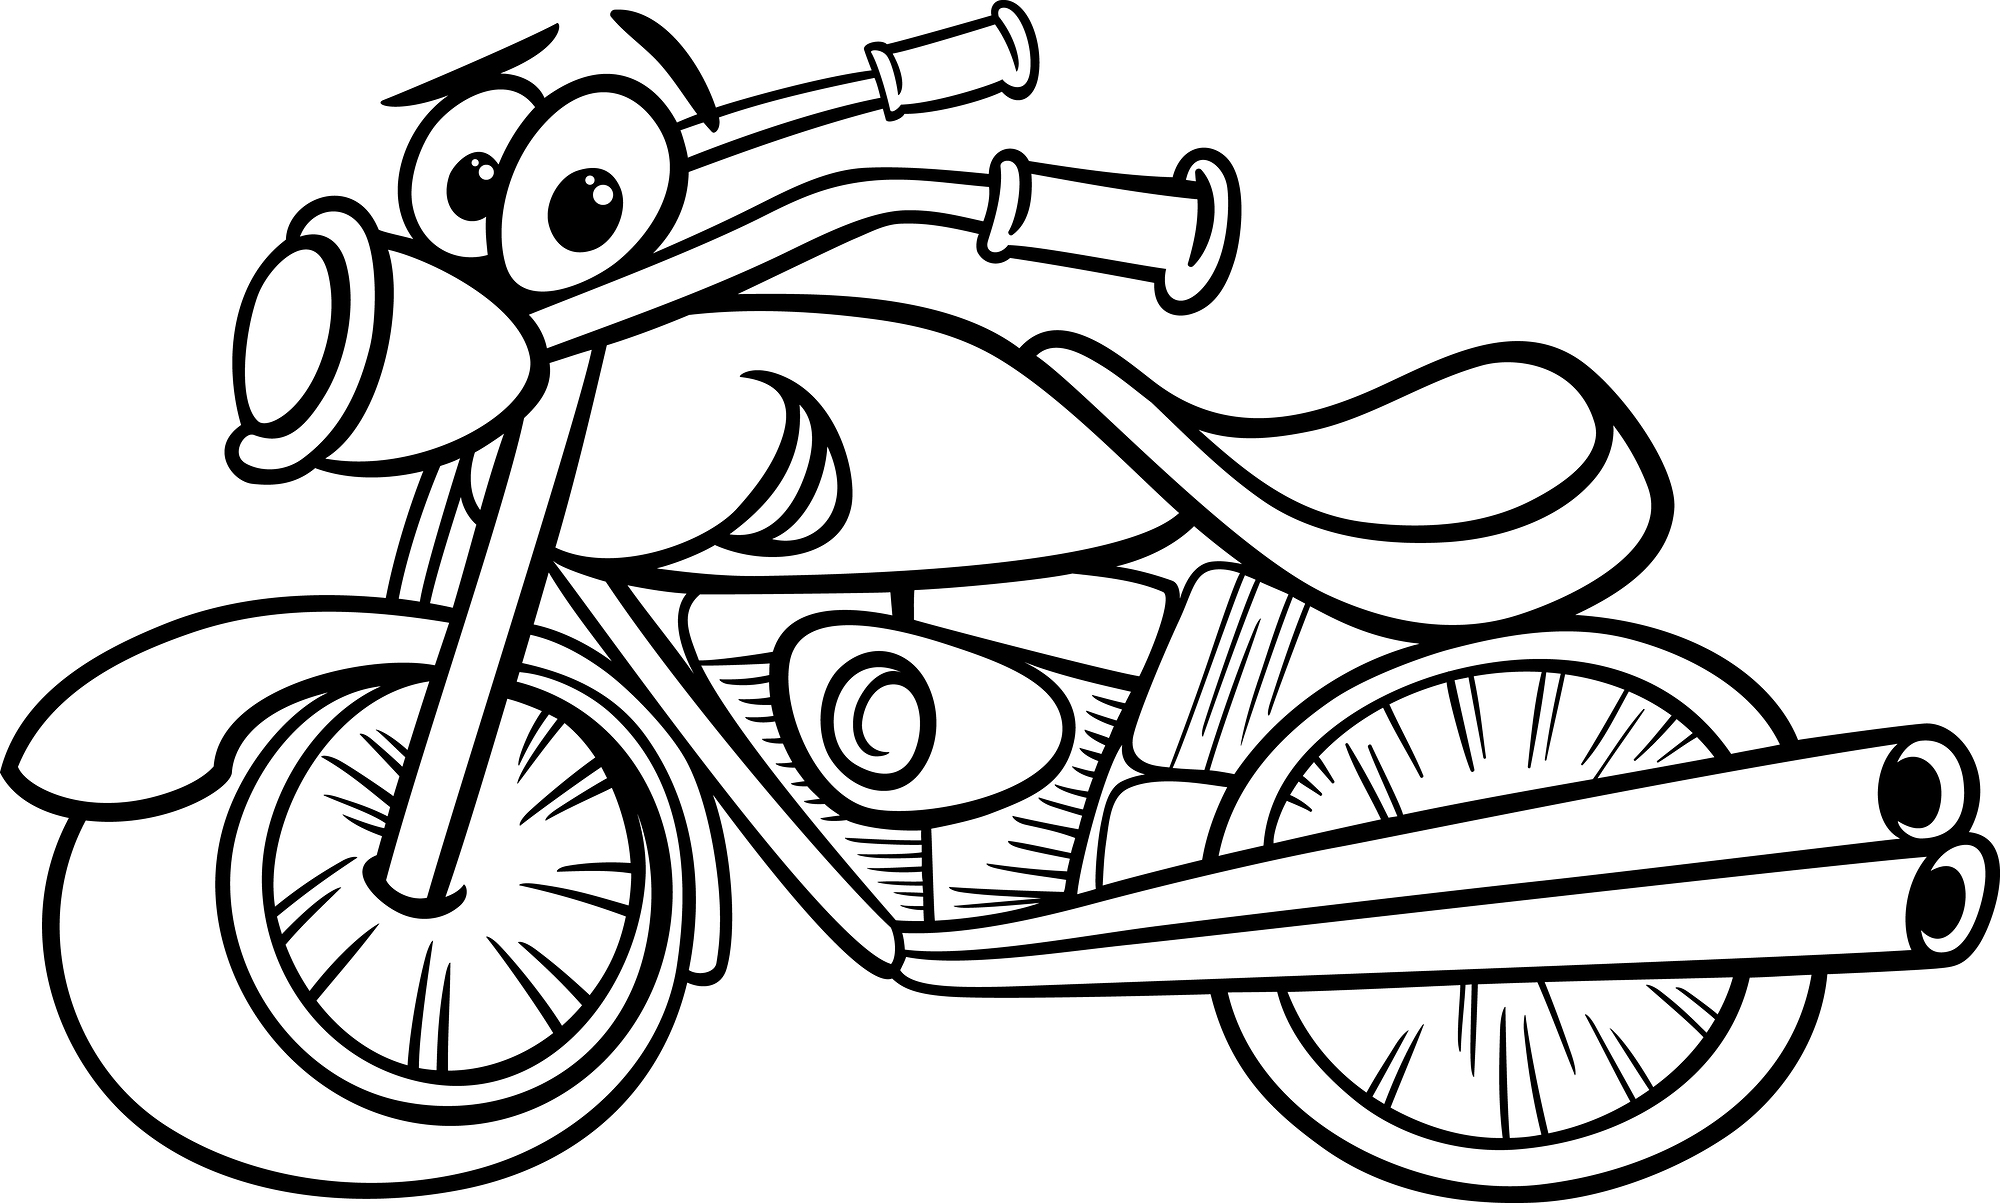 Motorcycle Coloring Pages For Adults At GetDrawings.com - Coloring Home